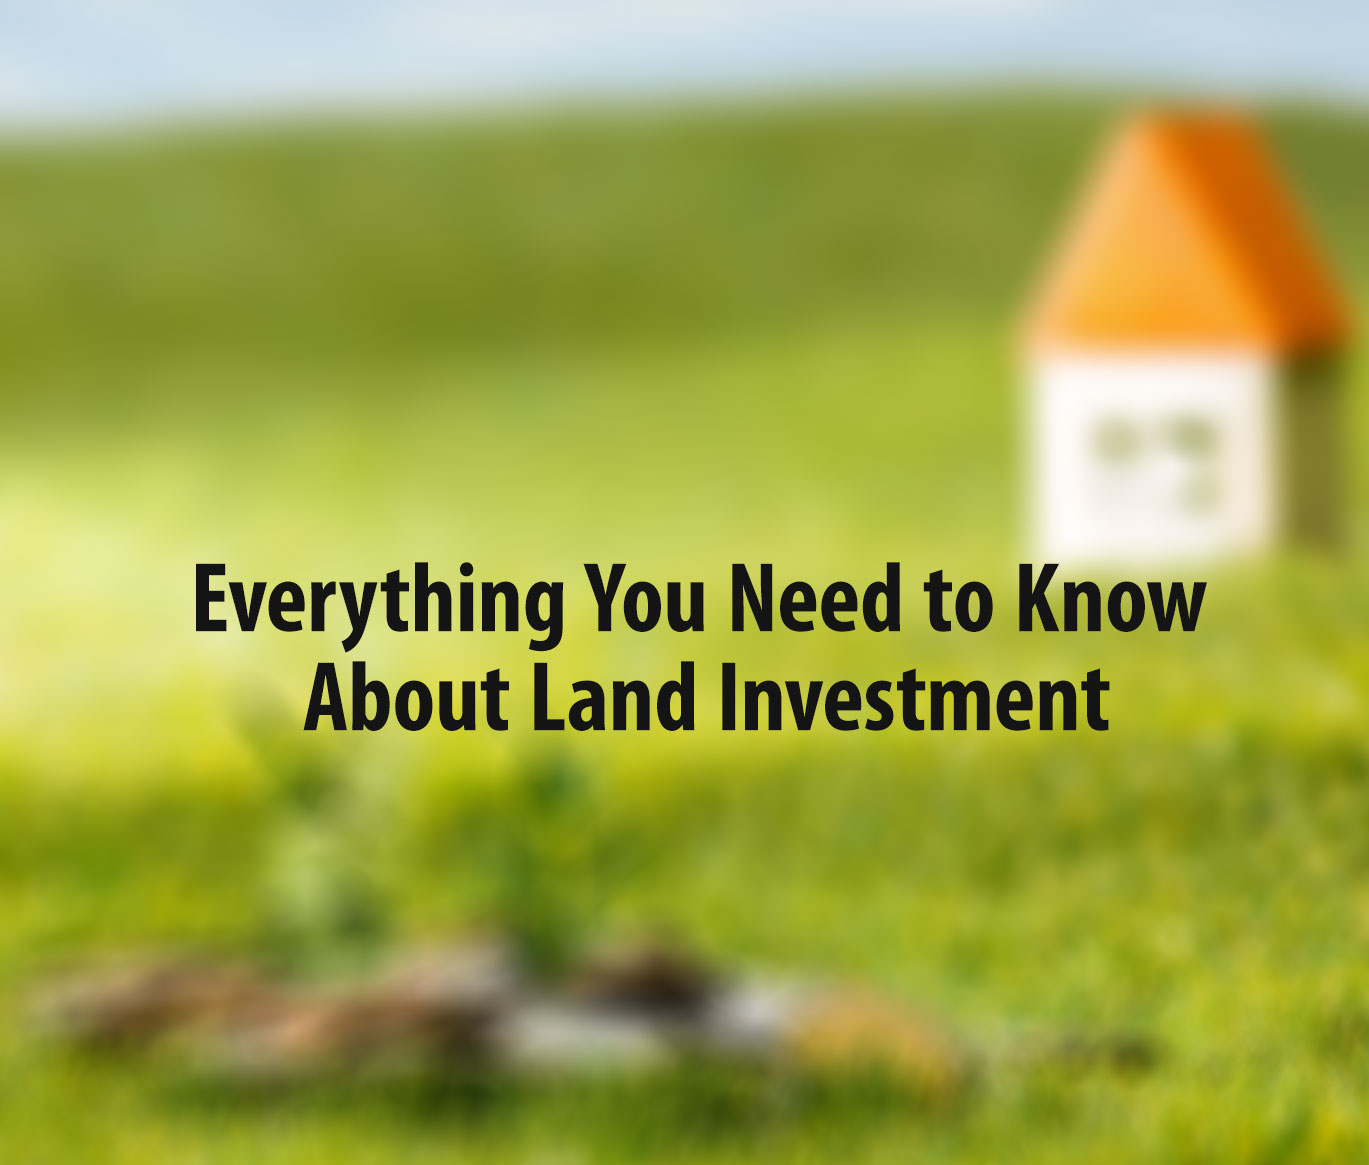 Everything You Need to Know About Land Investment